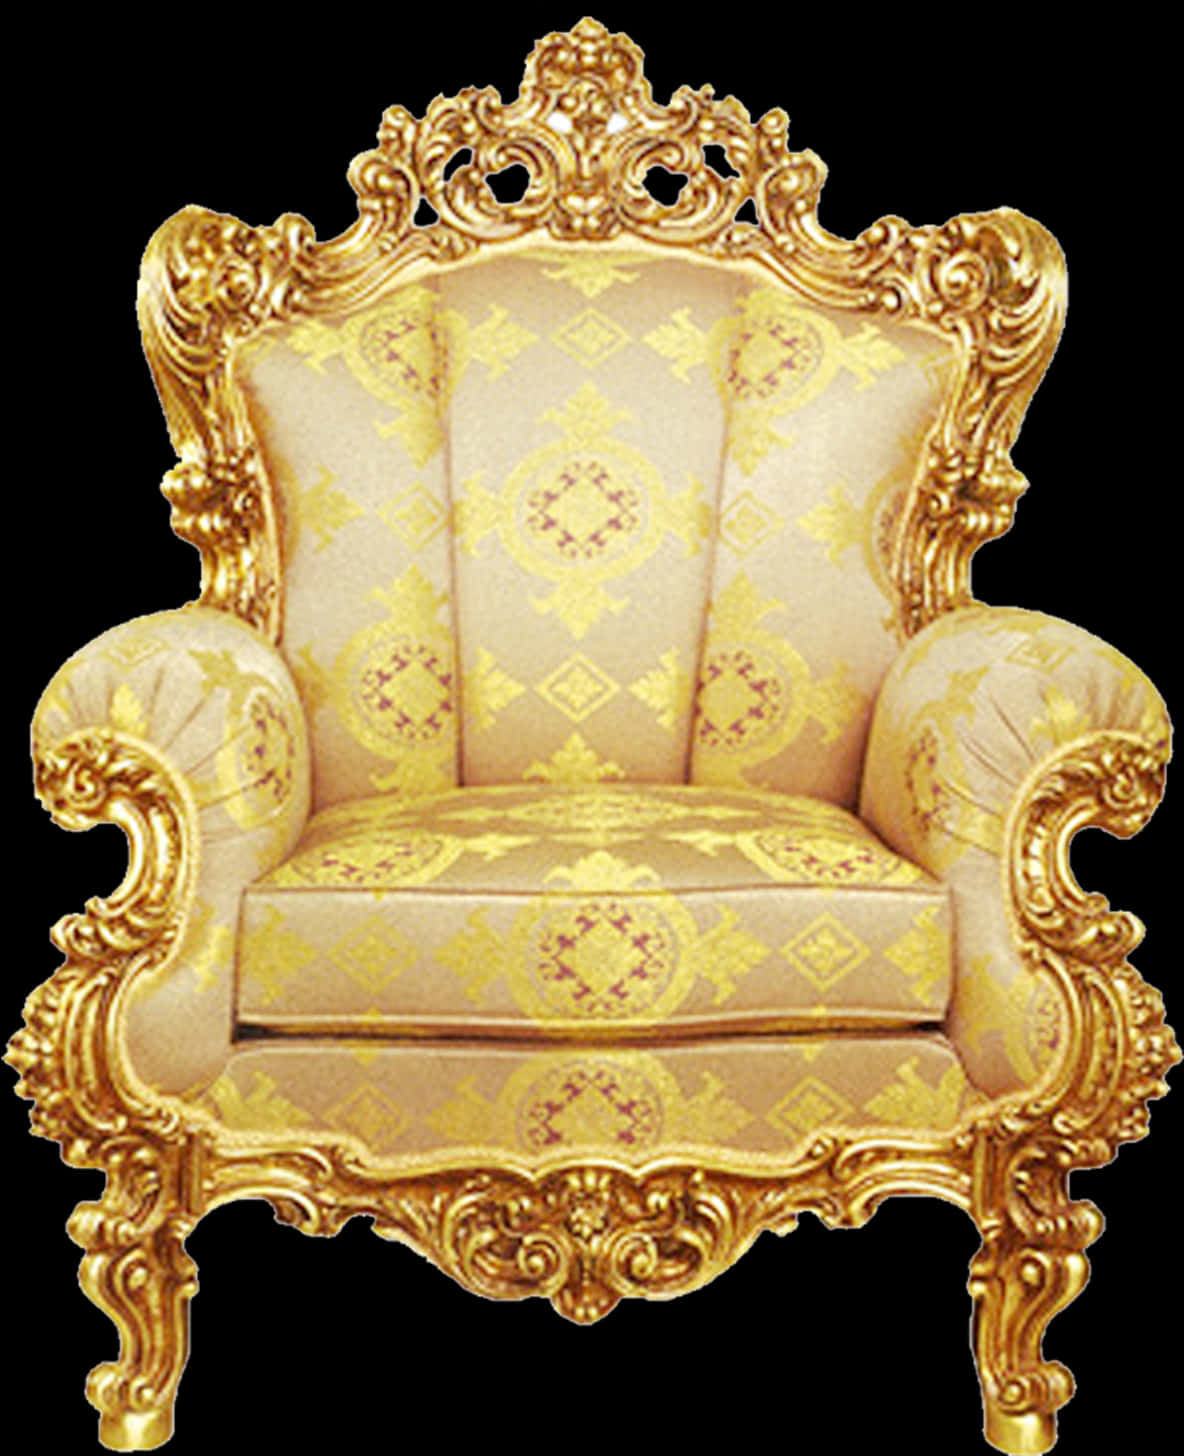 A Gold And White Chair